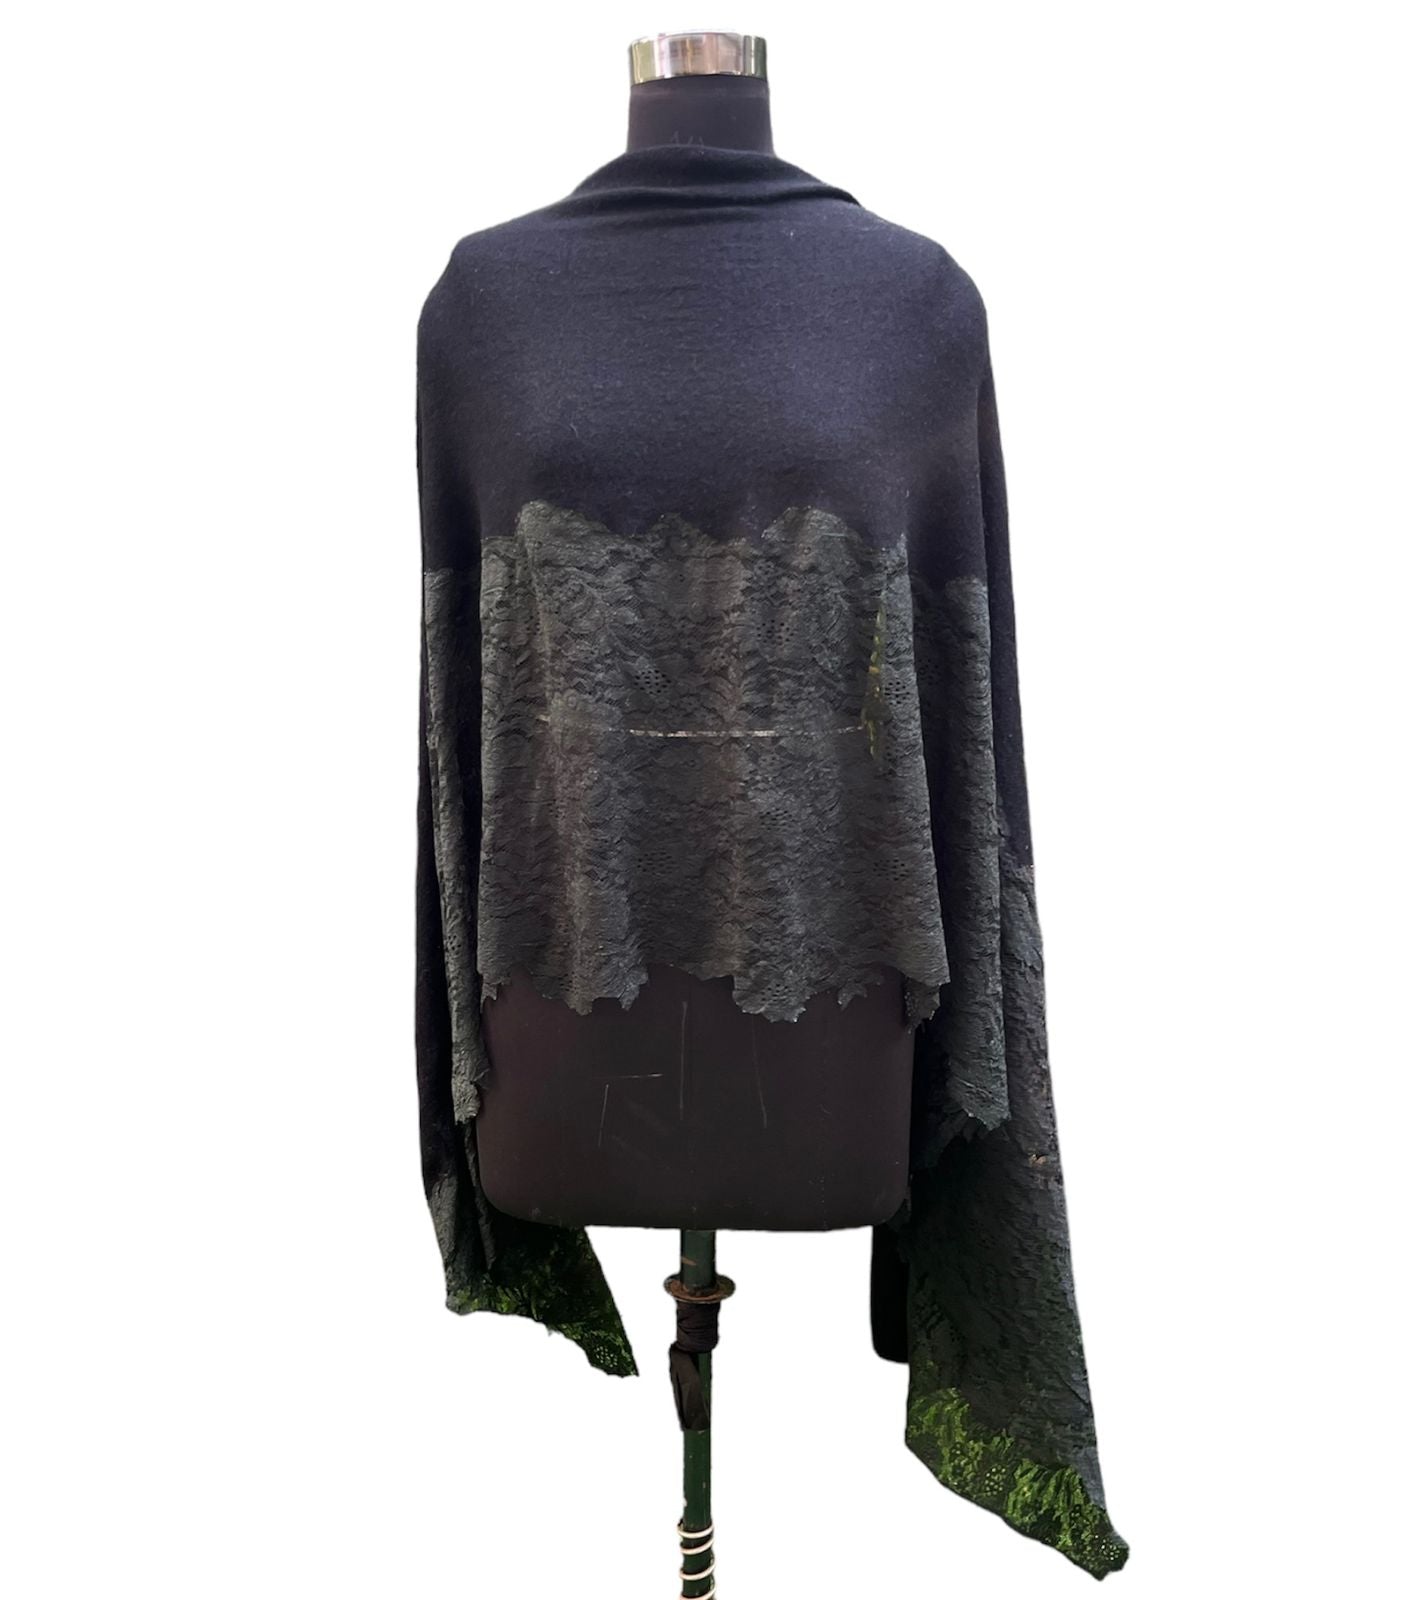 Dahlia Half Lace Half Knitted Stole